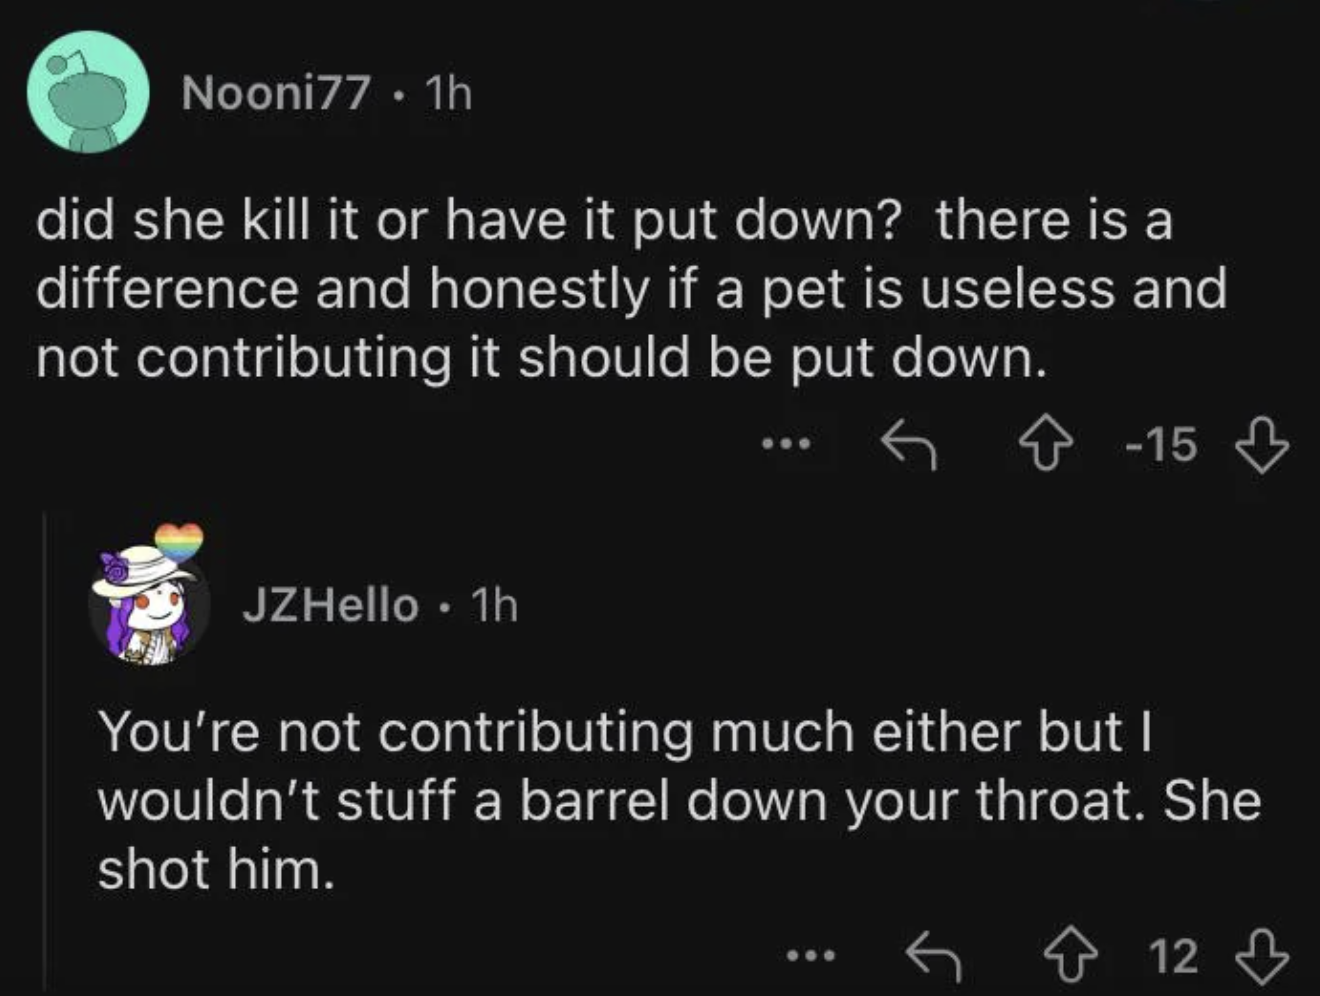 screenshot - Nooni77 1h did she kill it or have it put down? there is a difference and honestly if a pet is useless and not contributing it should be put down. 15 JZHello. 1h You're not contributing much either but I wouldn't stuff a barrel down your thro